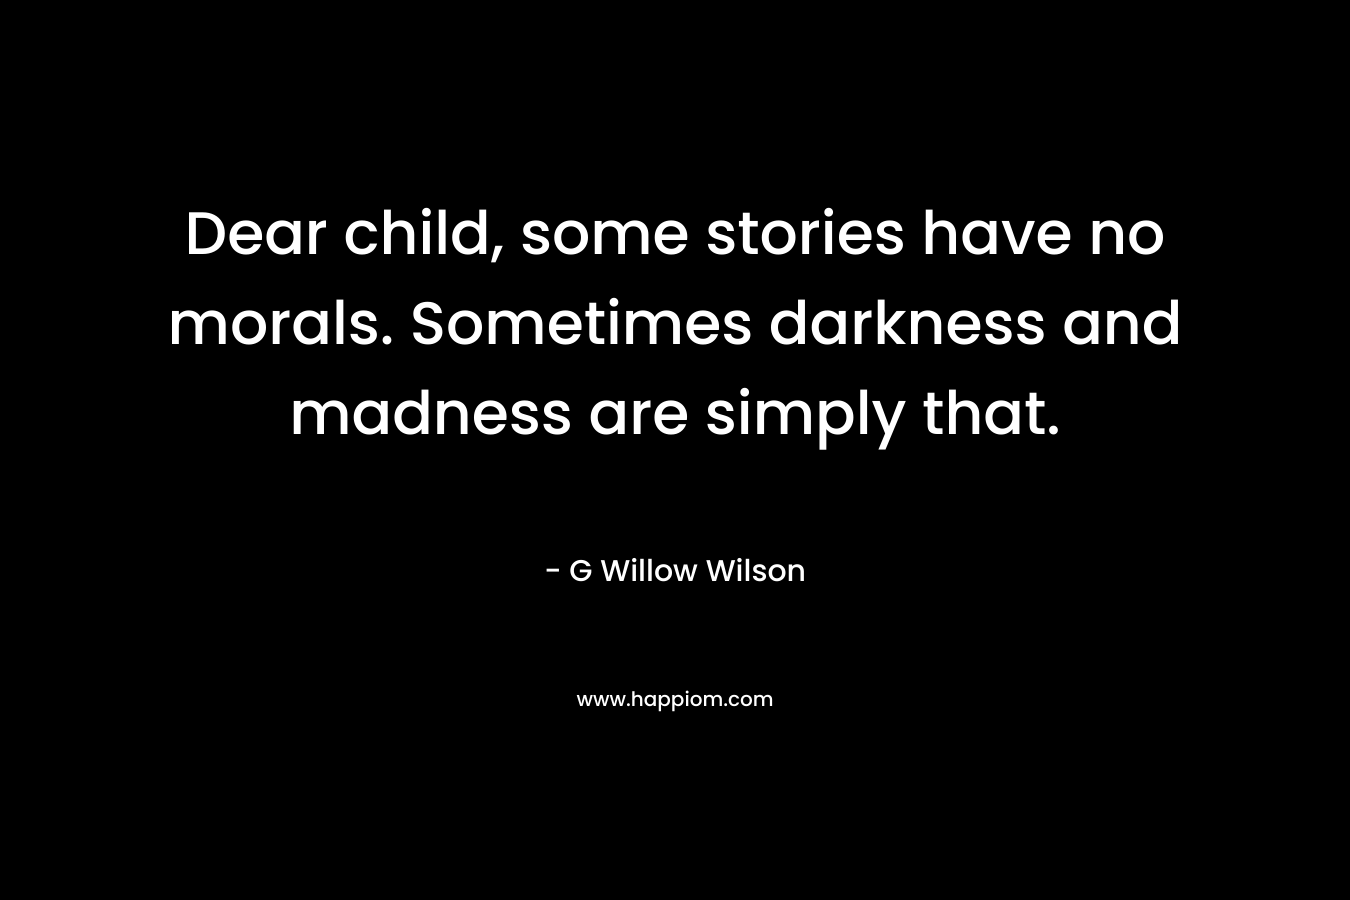 Dear child, some stories have no morals. Sometimes darkness and madness are simply that. – G Willow Wilson